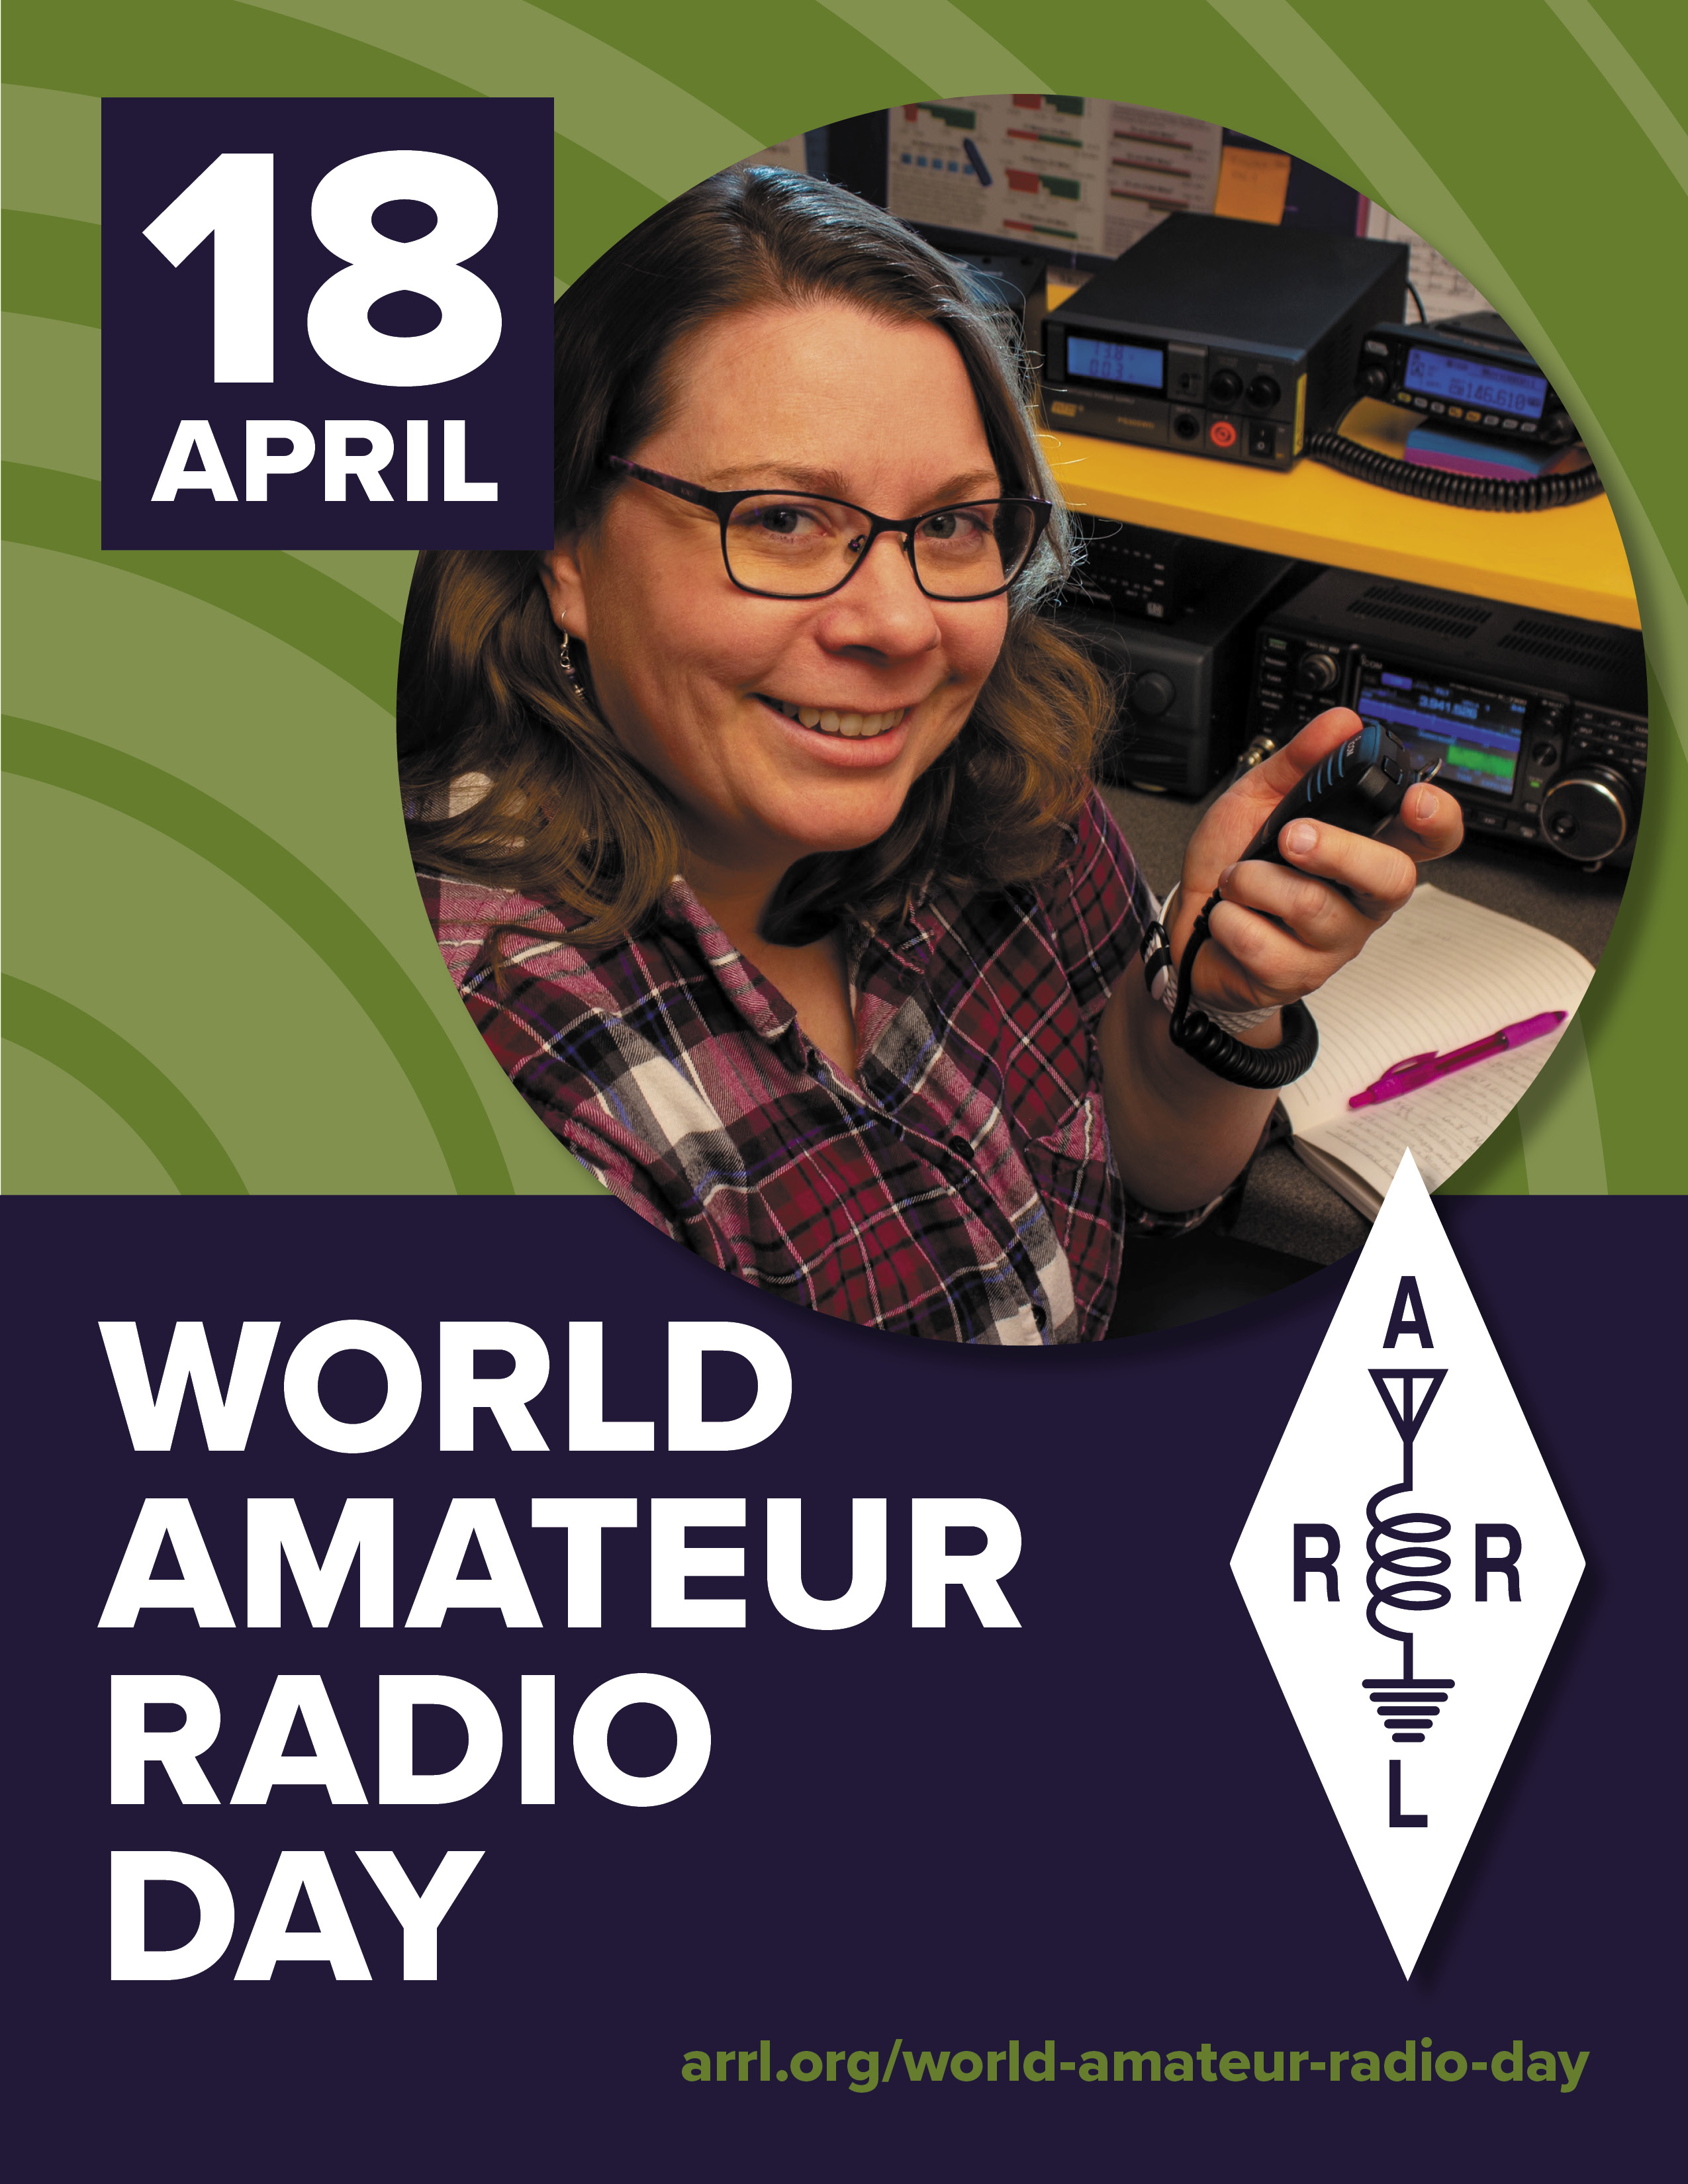 Spread The Word 2021 World Amateur Radio Day Is April 18